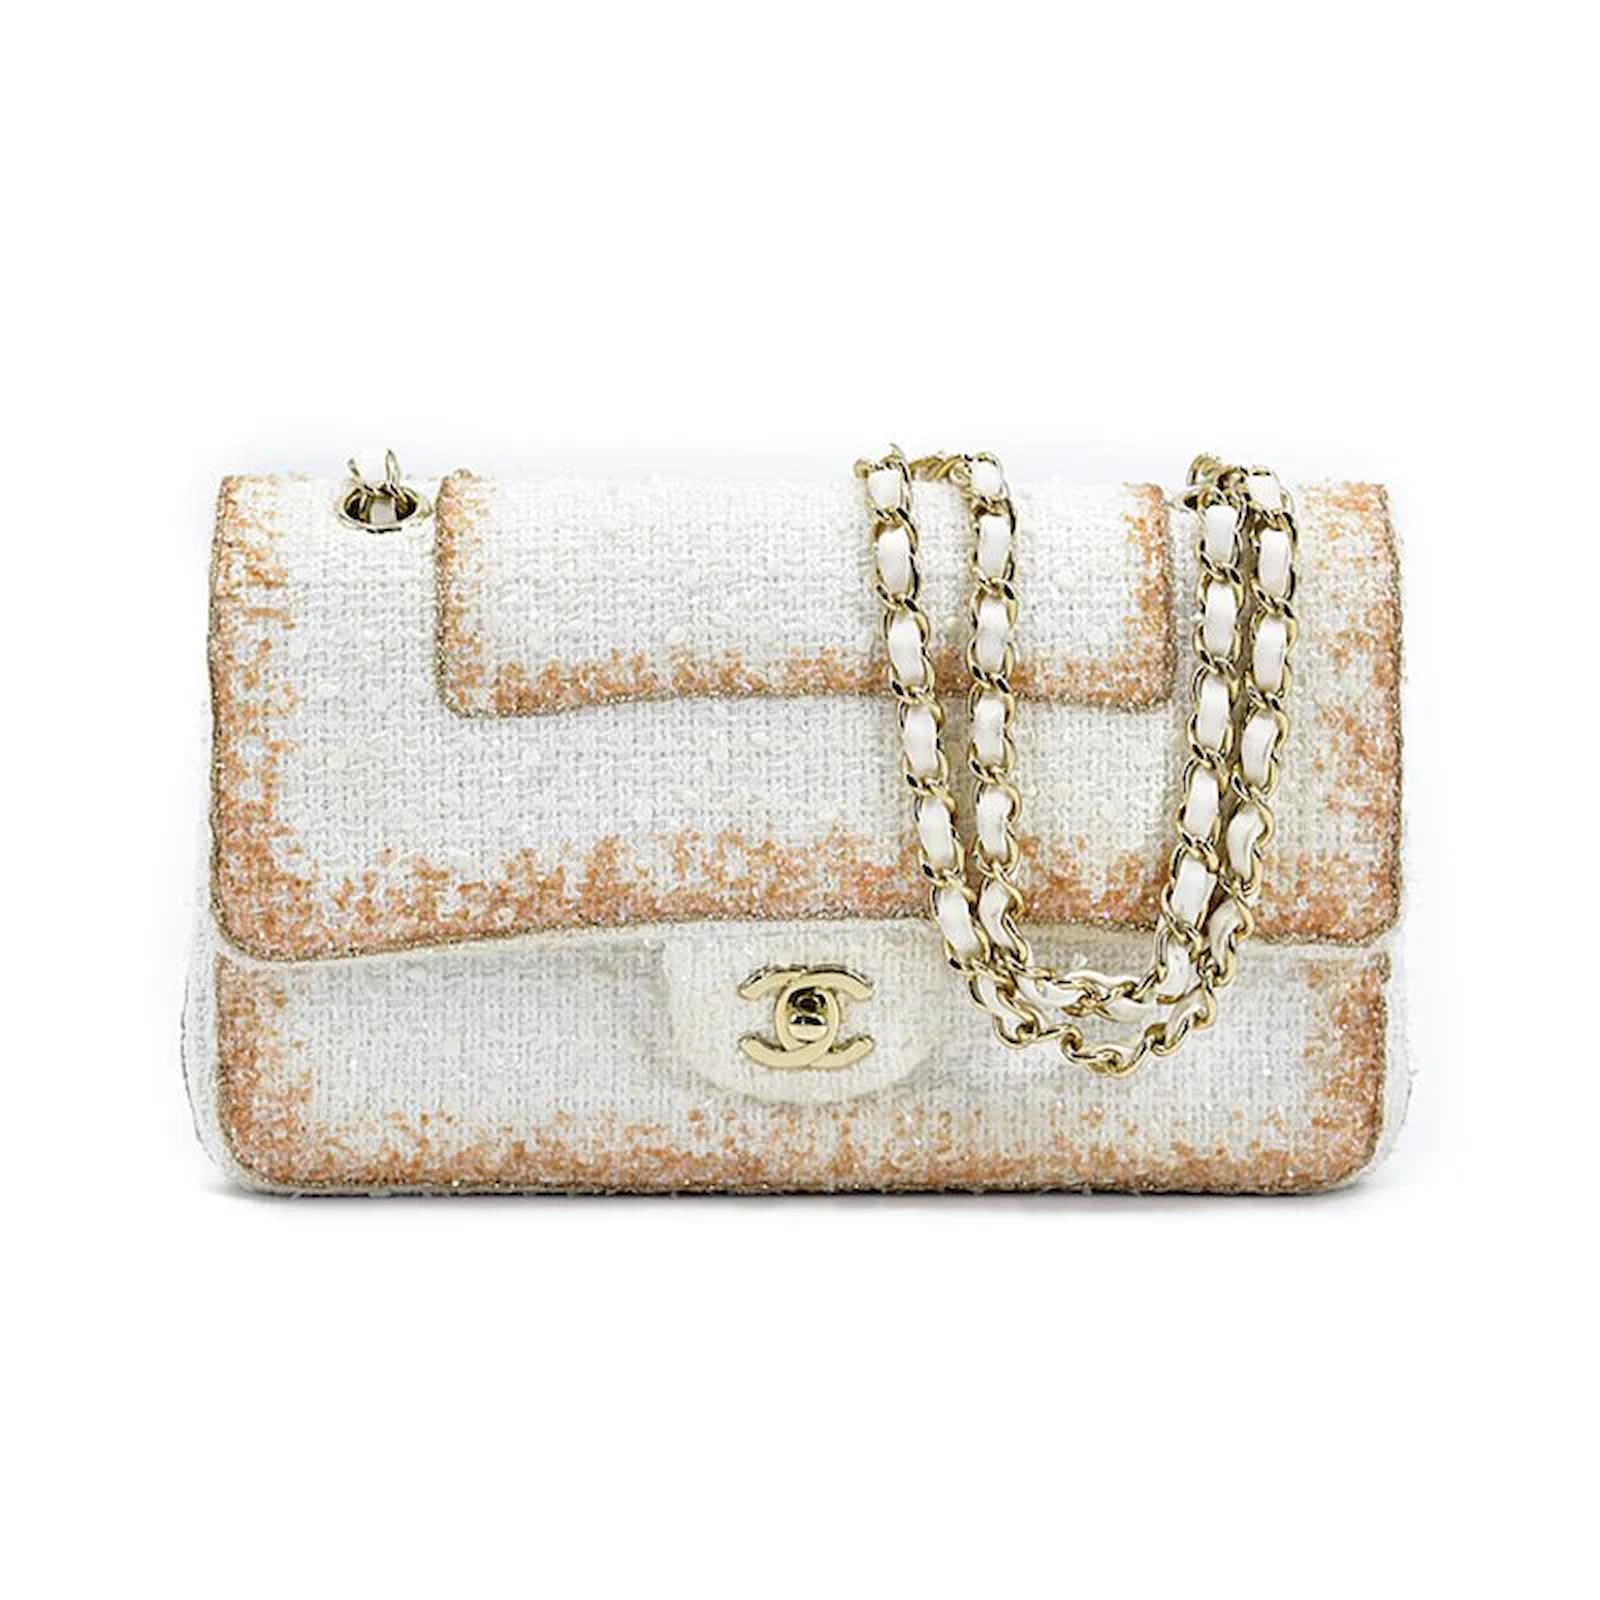 Chanel Medium Classic Double Flap Tweed Shoulder Bag in White